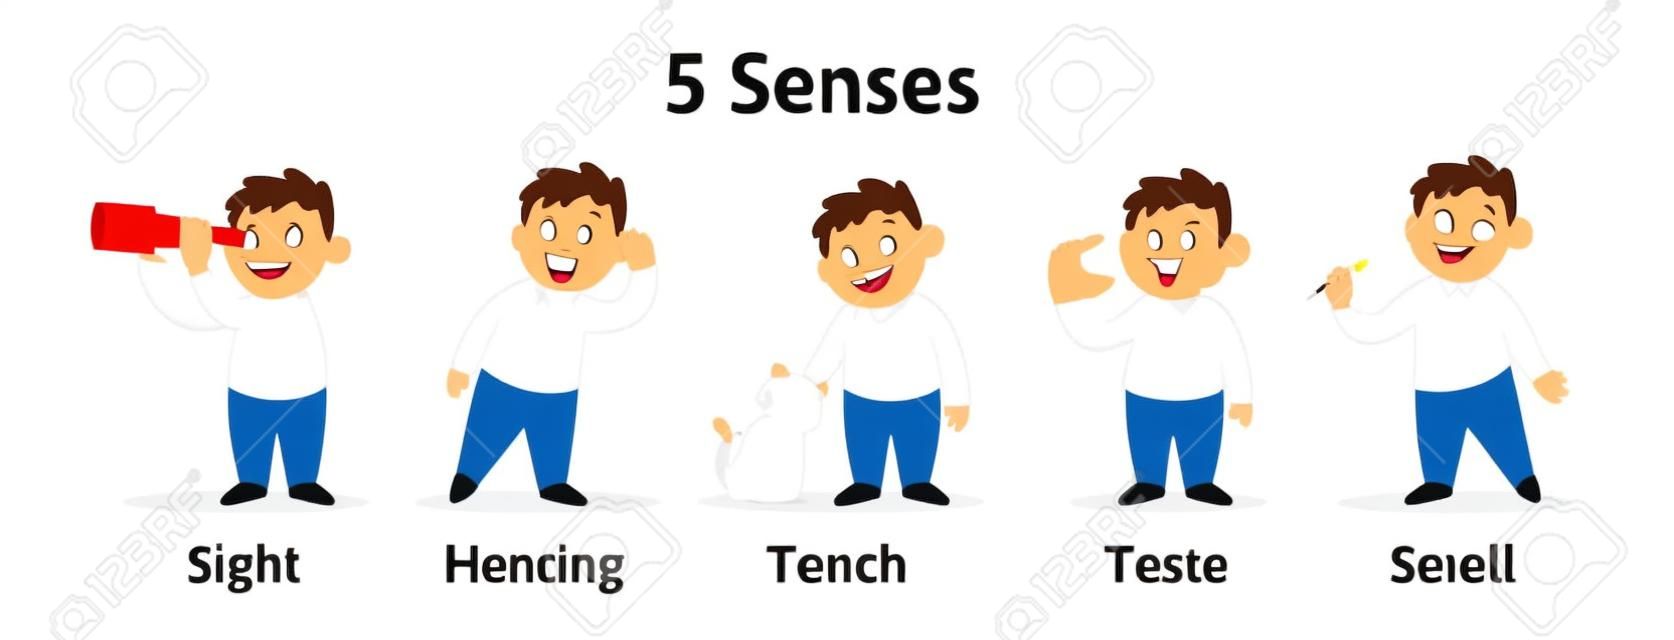 Set of 5 senses in cartoon character cards. Sight, smell, touch, hearing, and taste explained with coloful cards. Flat vector illustration, isolated on white background.